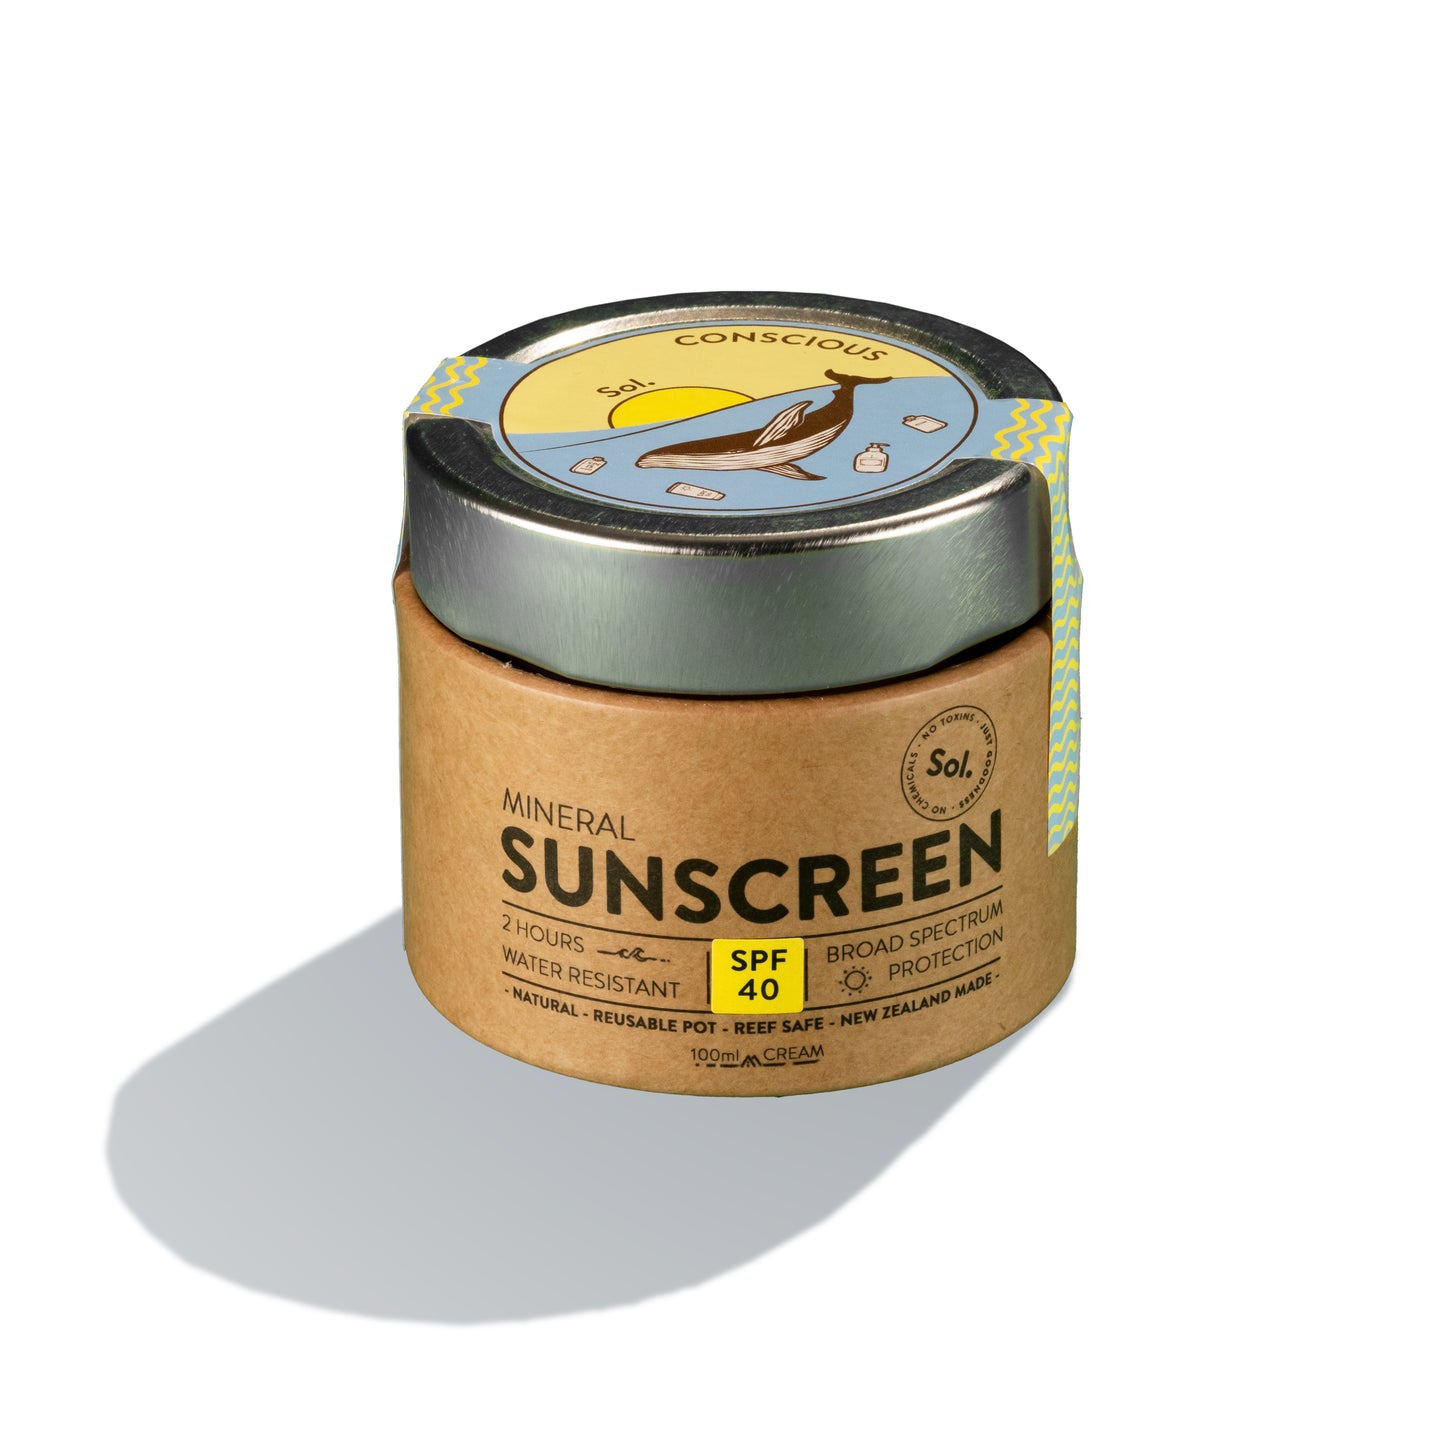 SPF 40 Natural mineral sustainable sunscreen, in plastic free packaging with 2 hours water resistant. New Zealand made. ethically sourced conscious sol